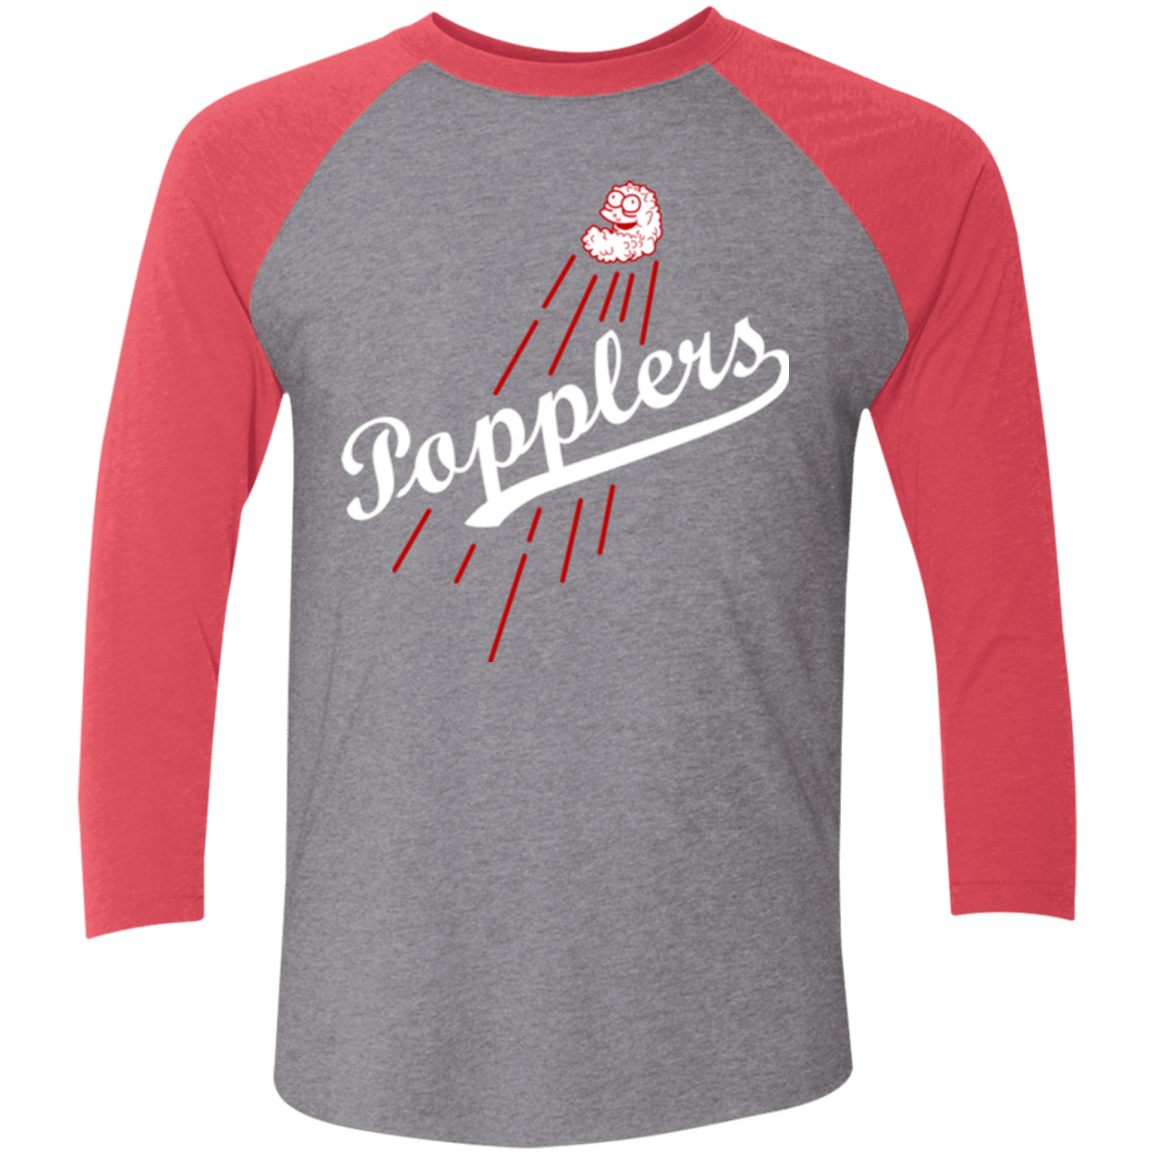 T-Shirts Premium Heather/ Vintage Red / X-Small Popplers Men's Triblend 3/4 Sleeve